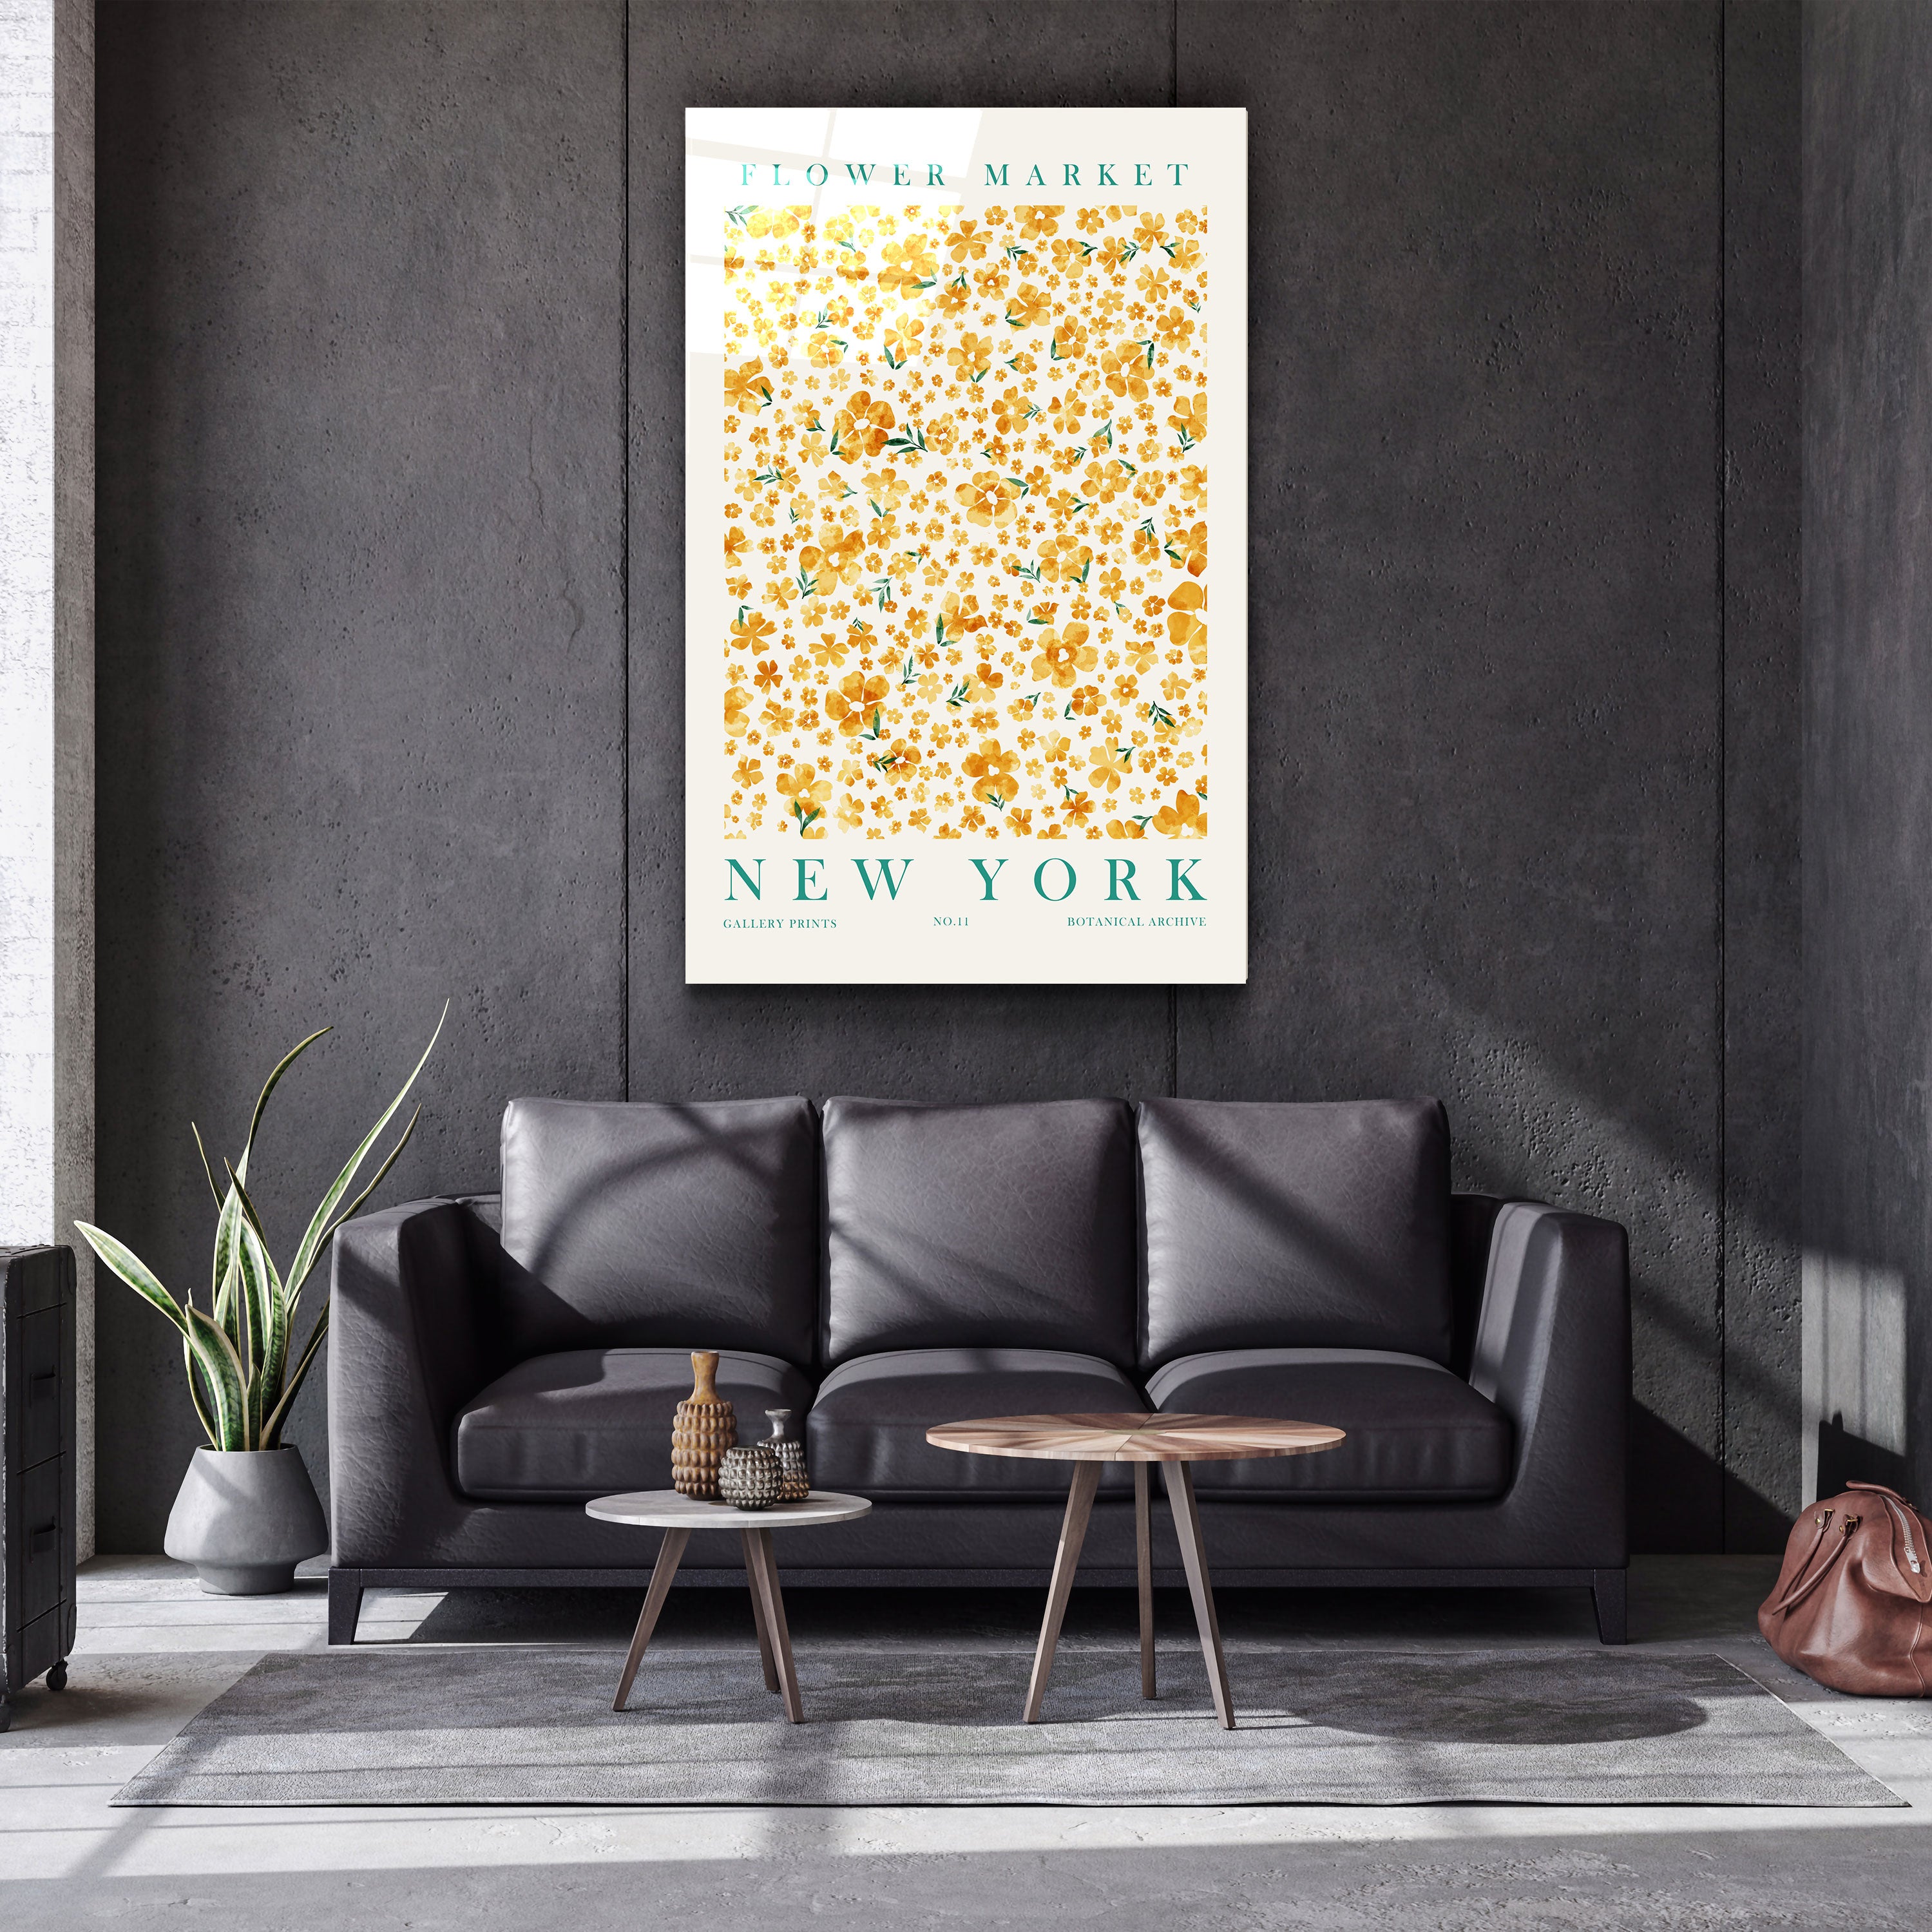 ・"Flower Market No:11 New York"・Gallery Print Collection Glass Wall Art